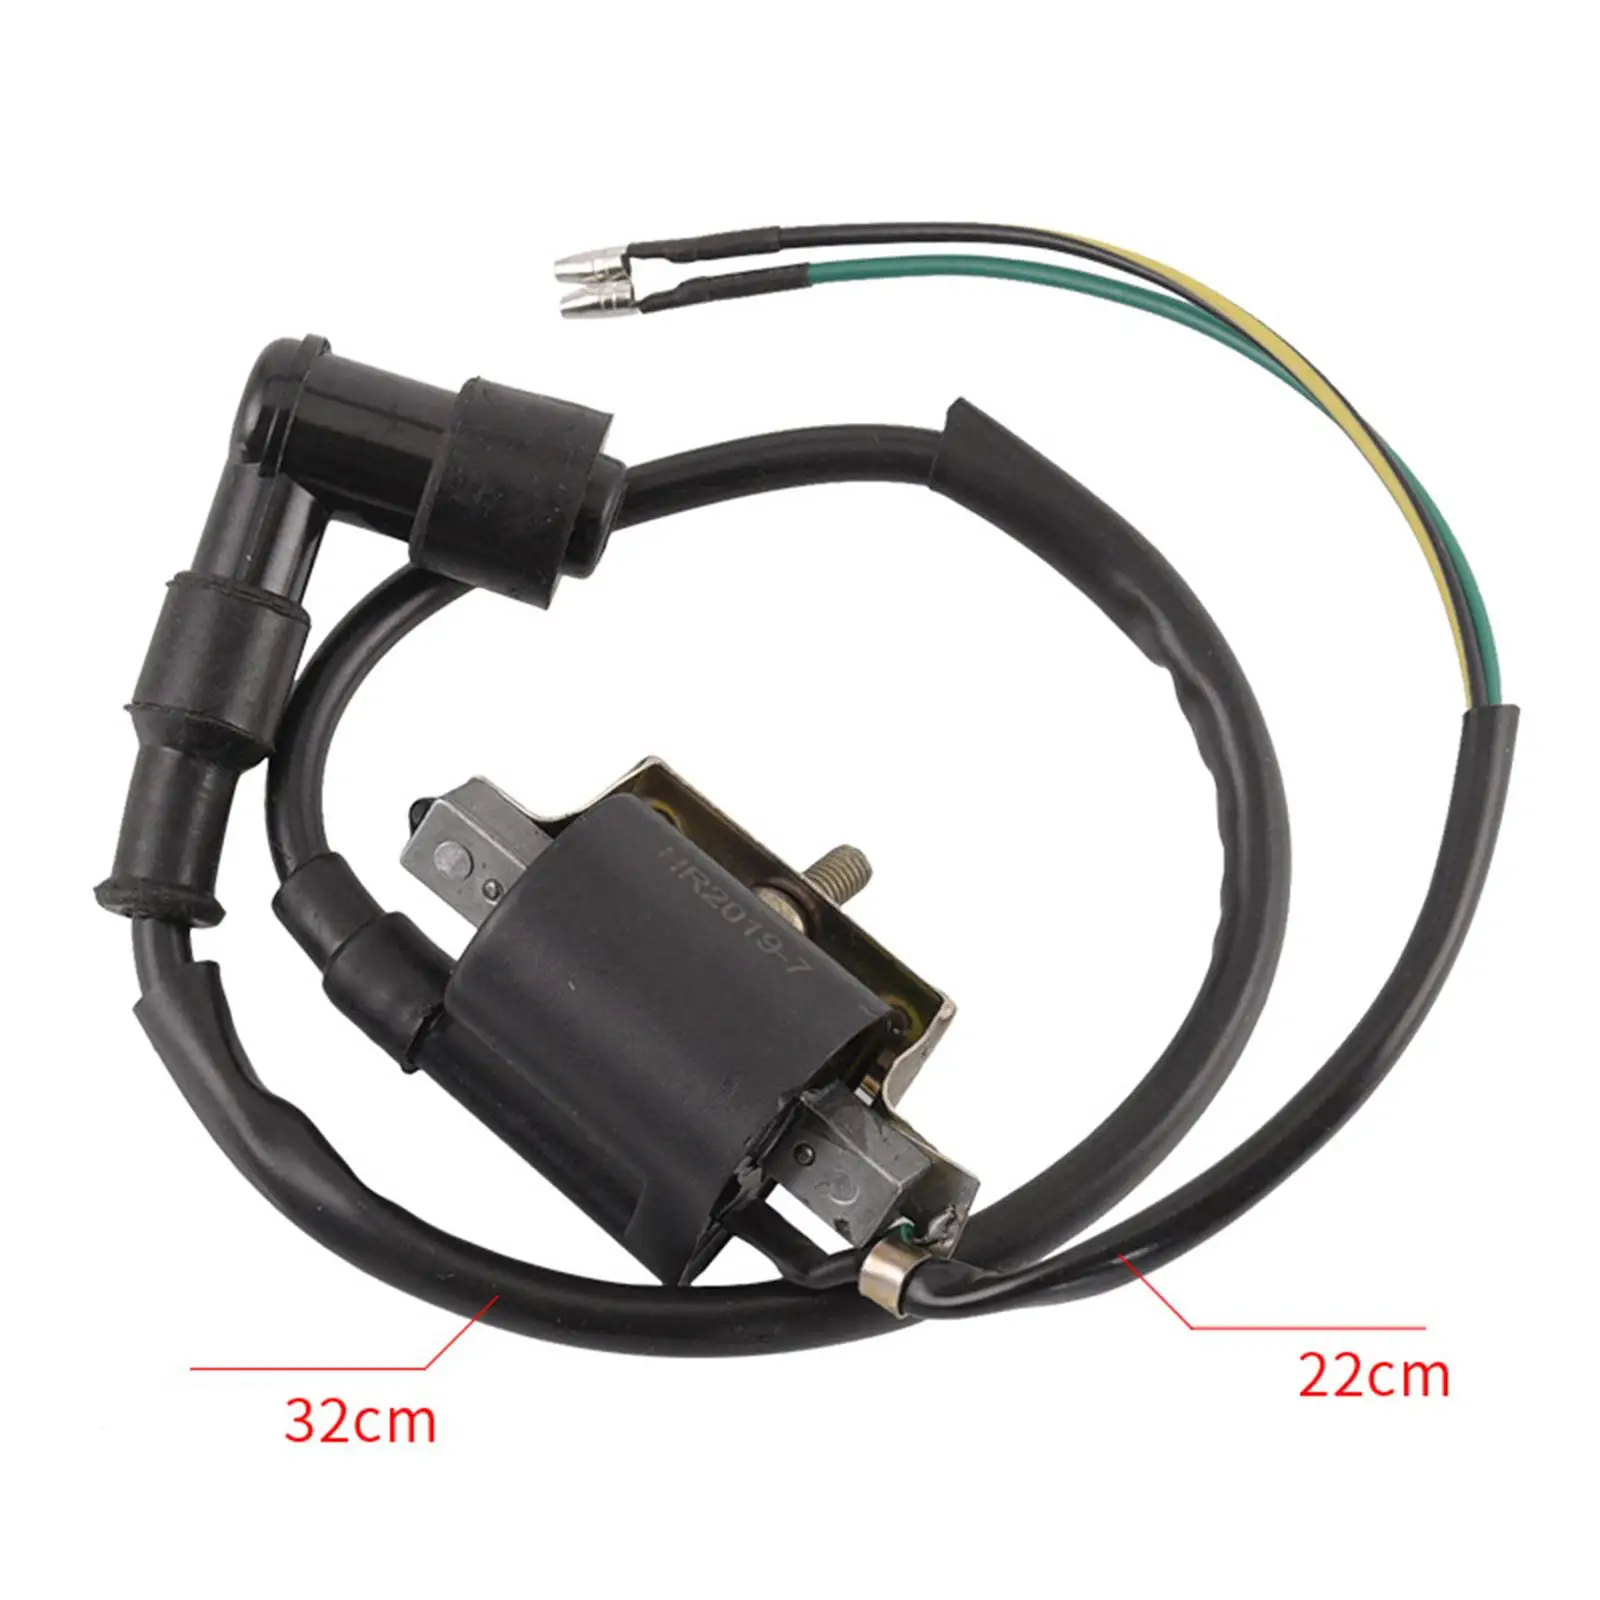 Cdi Box 5Pin Ignition  with  for 15 Quad  Bike   Professional Accessories Spare Parts